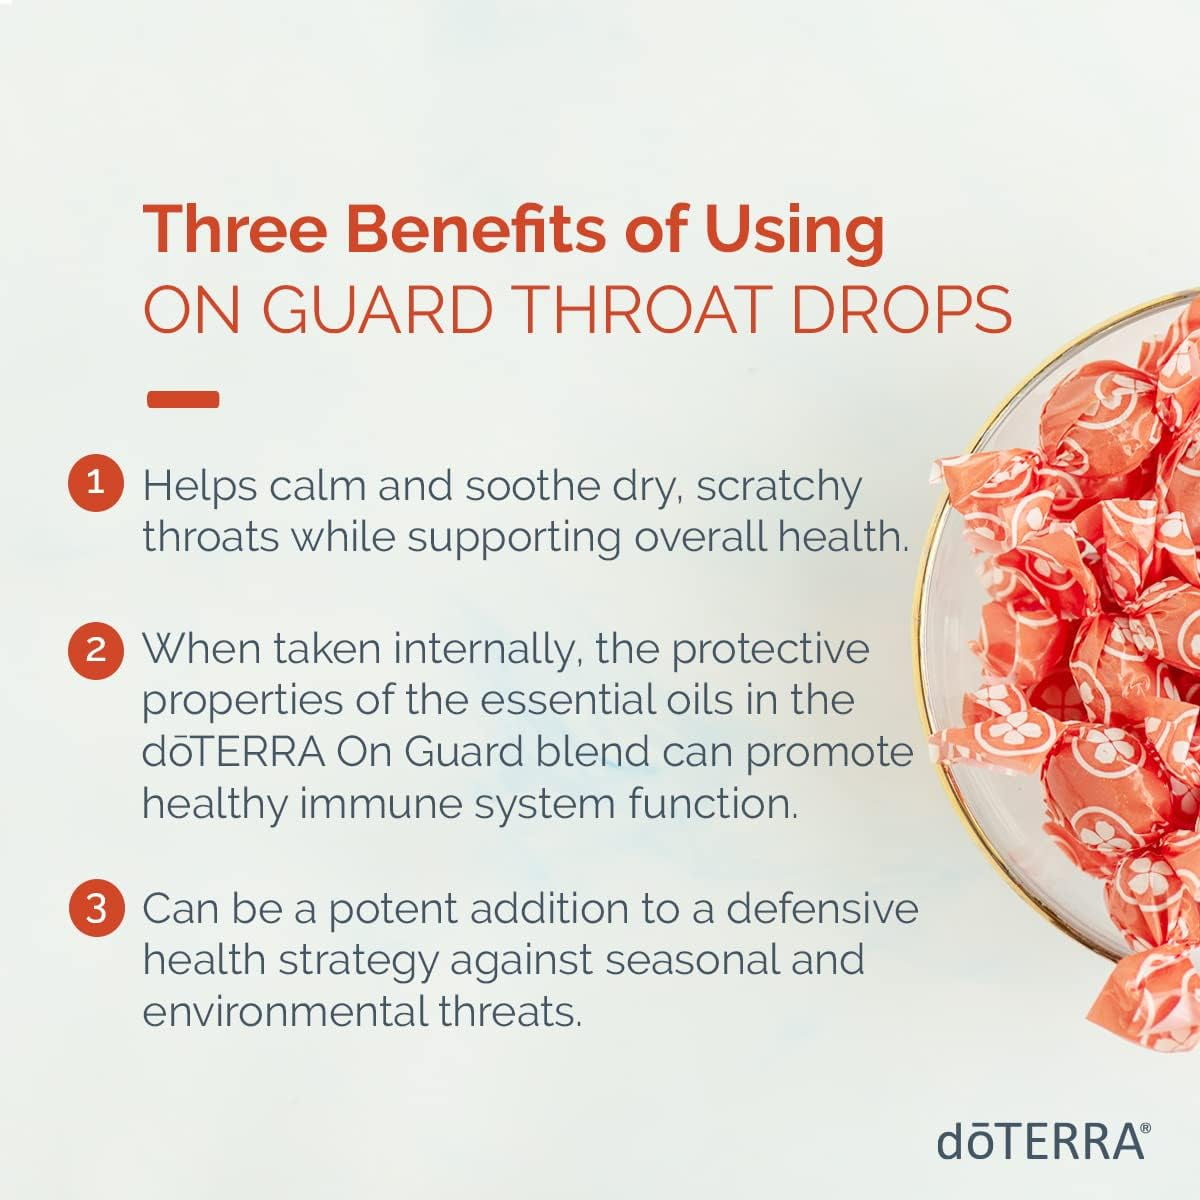 doTERRA On Guard Uses and Benefits